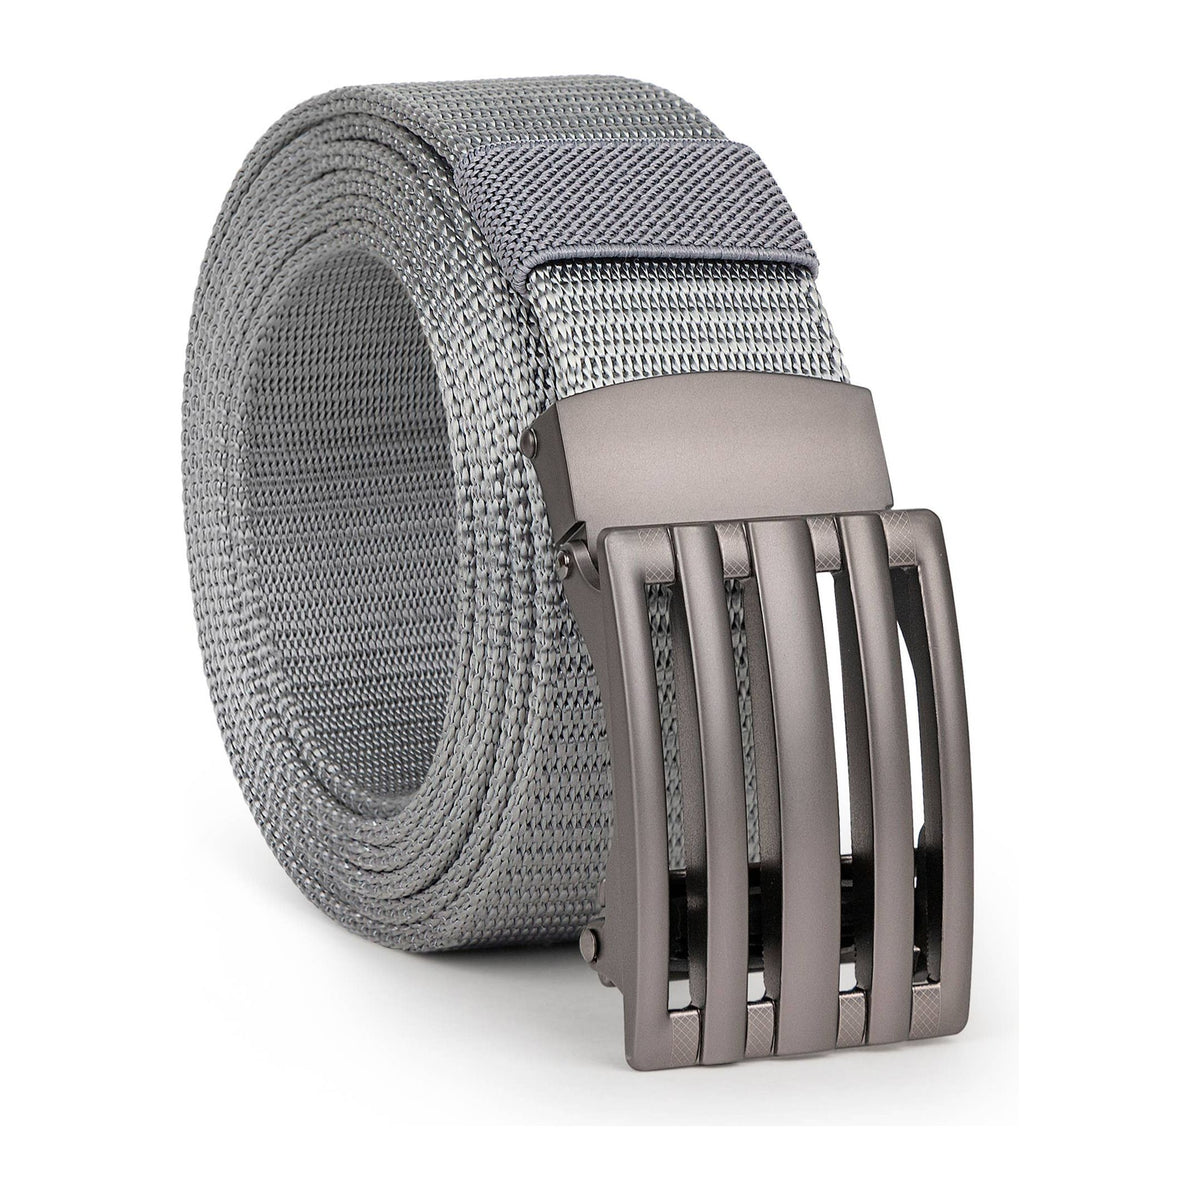 Mio Marino - Mens Tactical Ratchet Golf Belt: Adjustable from 28" to 44" Waist / Light Gray - BELT - Synik Clothing - synikclothing.com